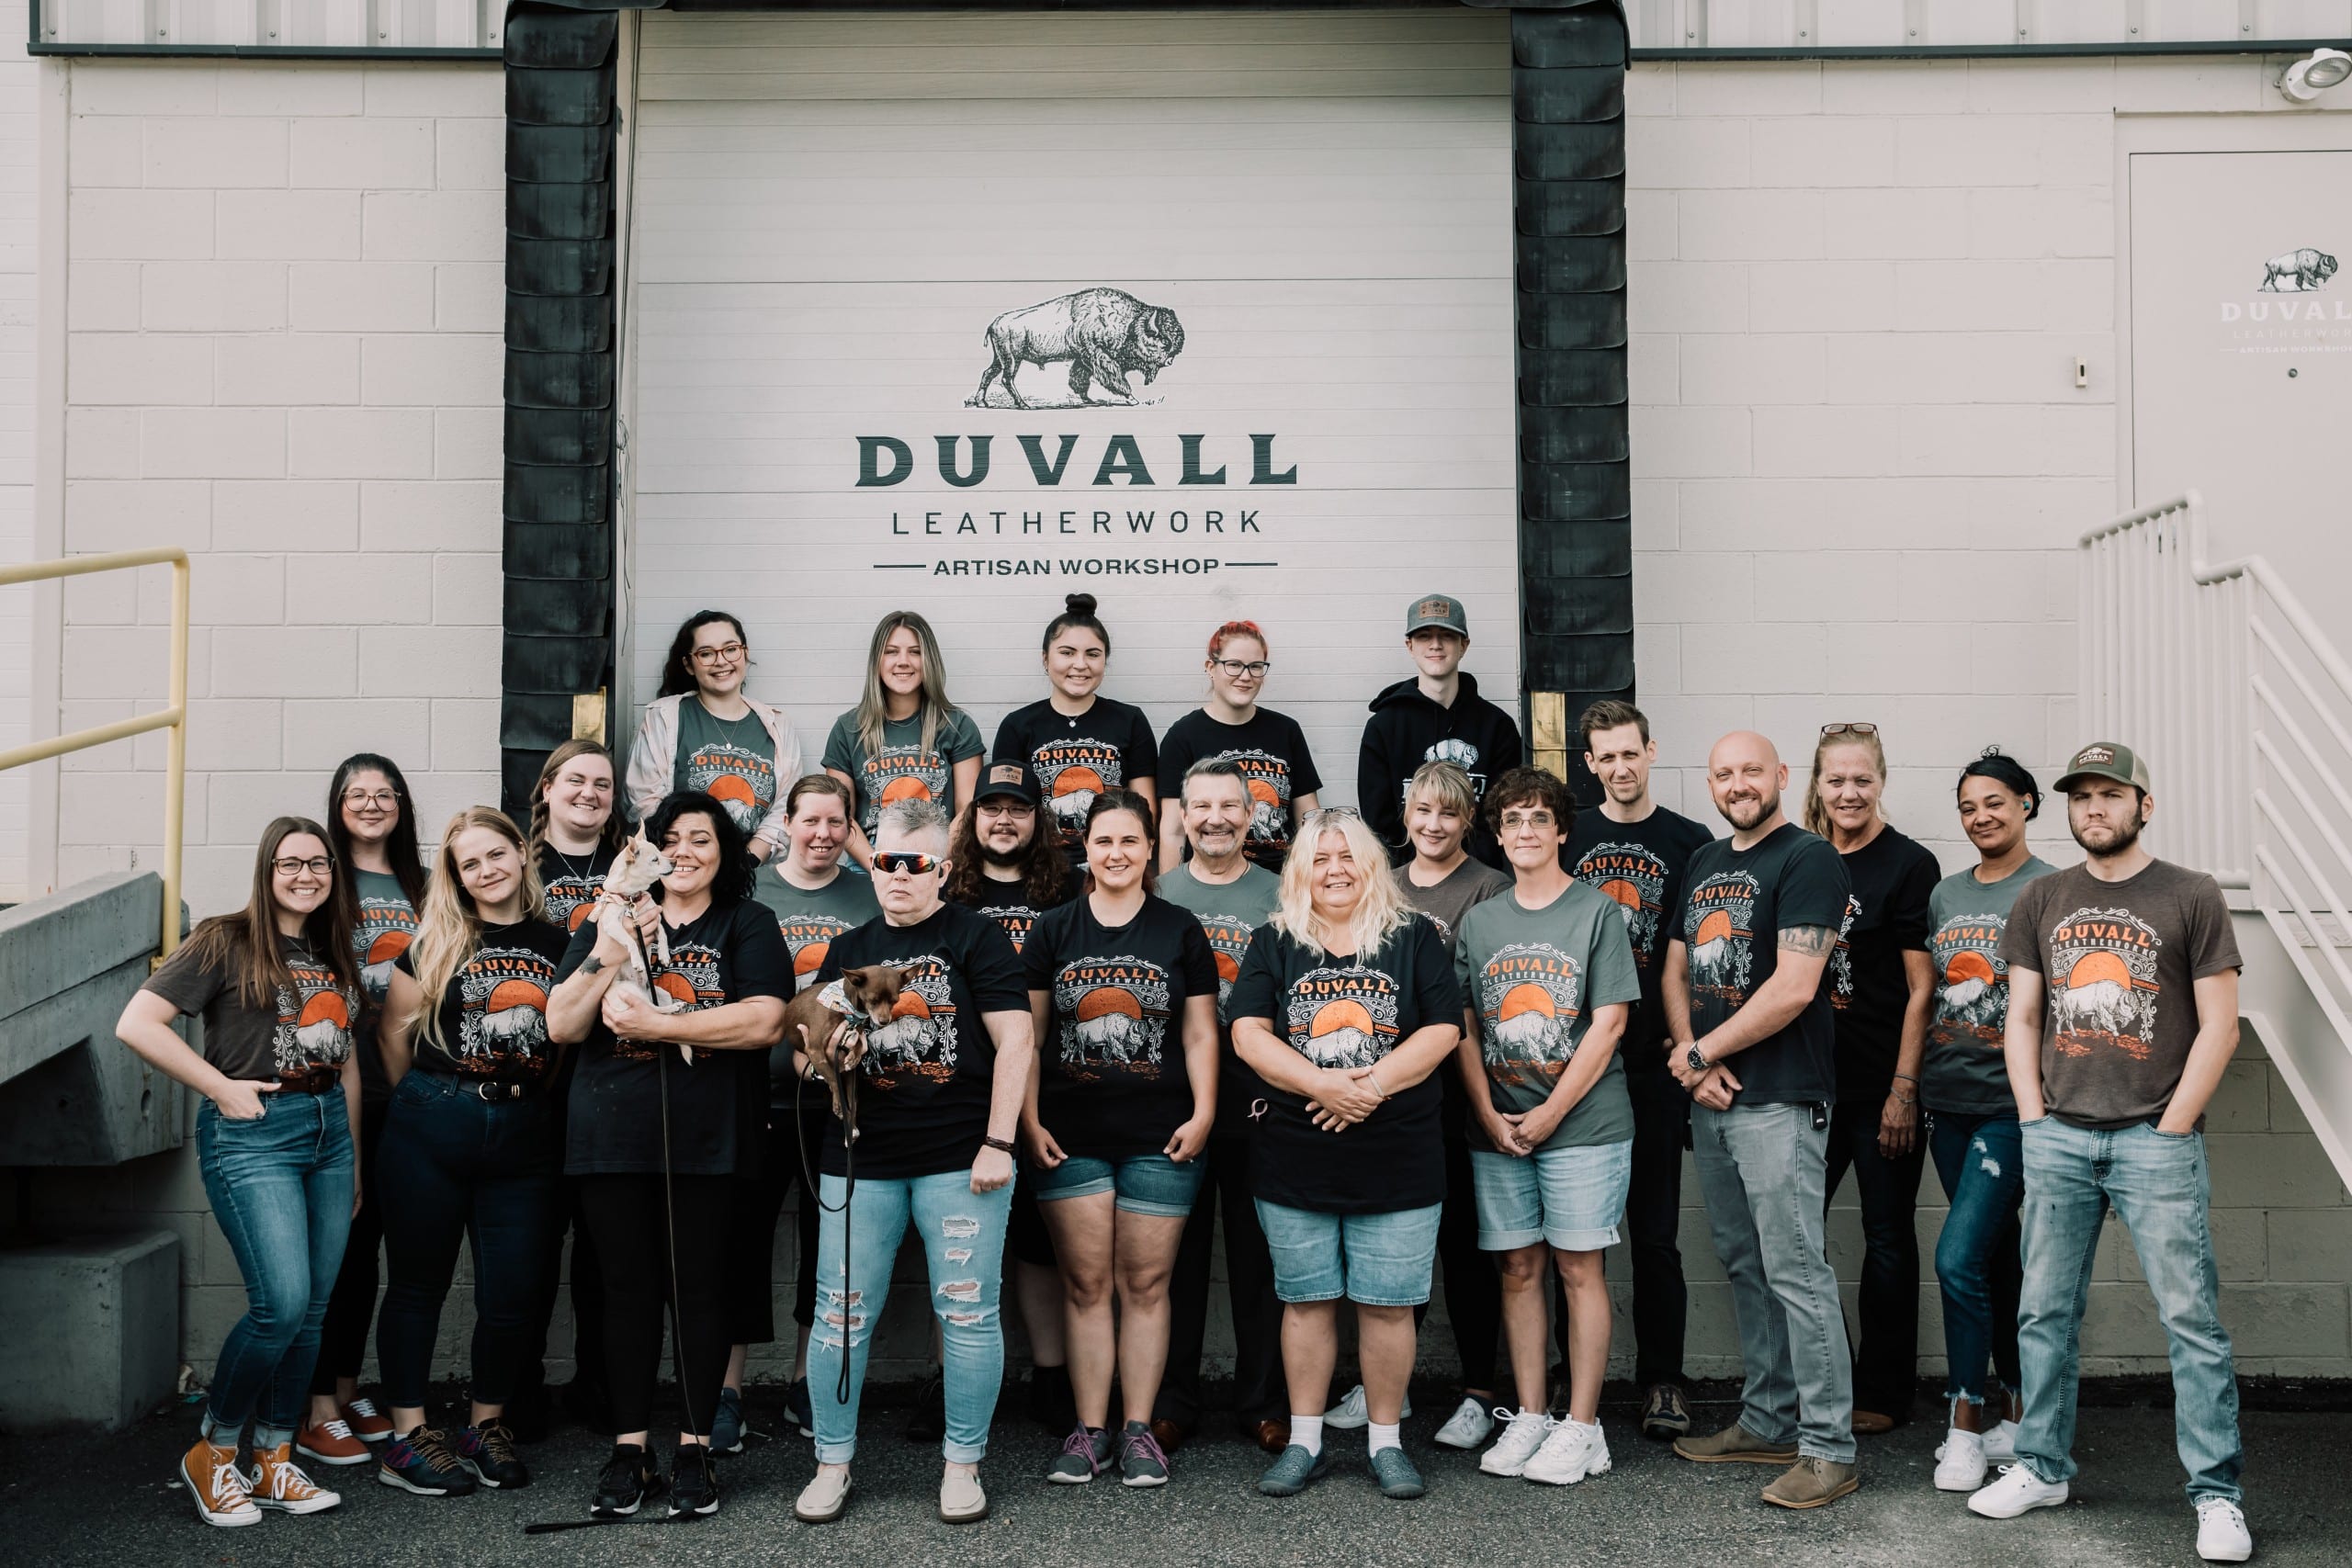 Duvall Leatherwork team photo 2022, the team is standing in front of the warehouse bay door with the duvall leatherwork logo above